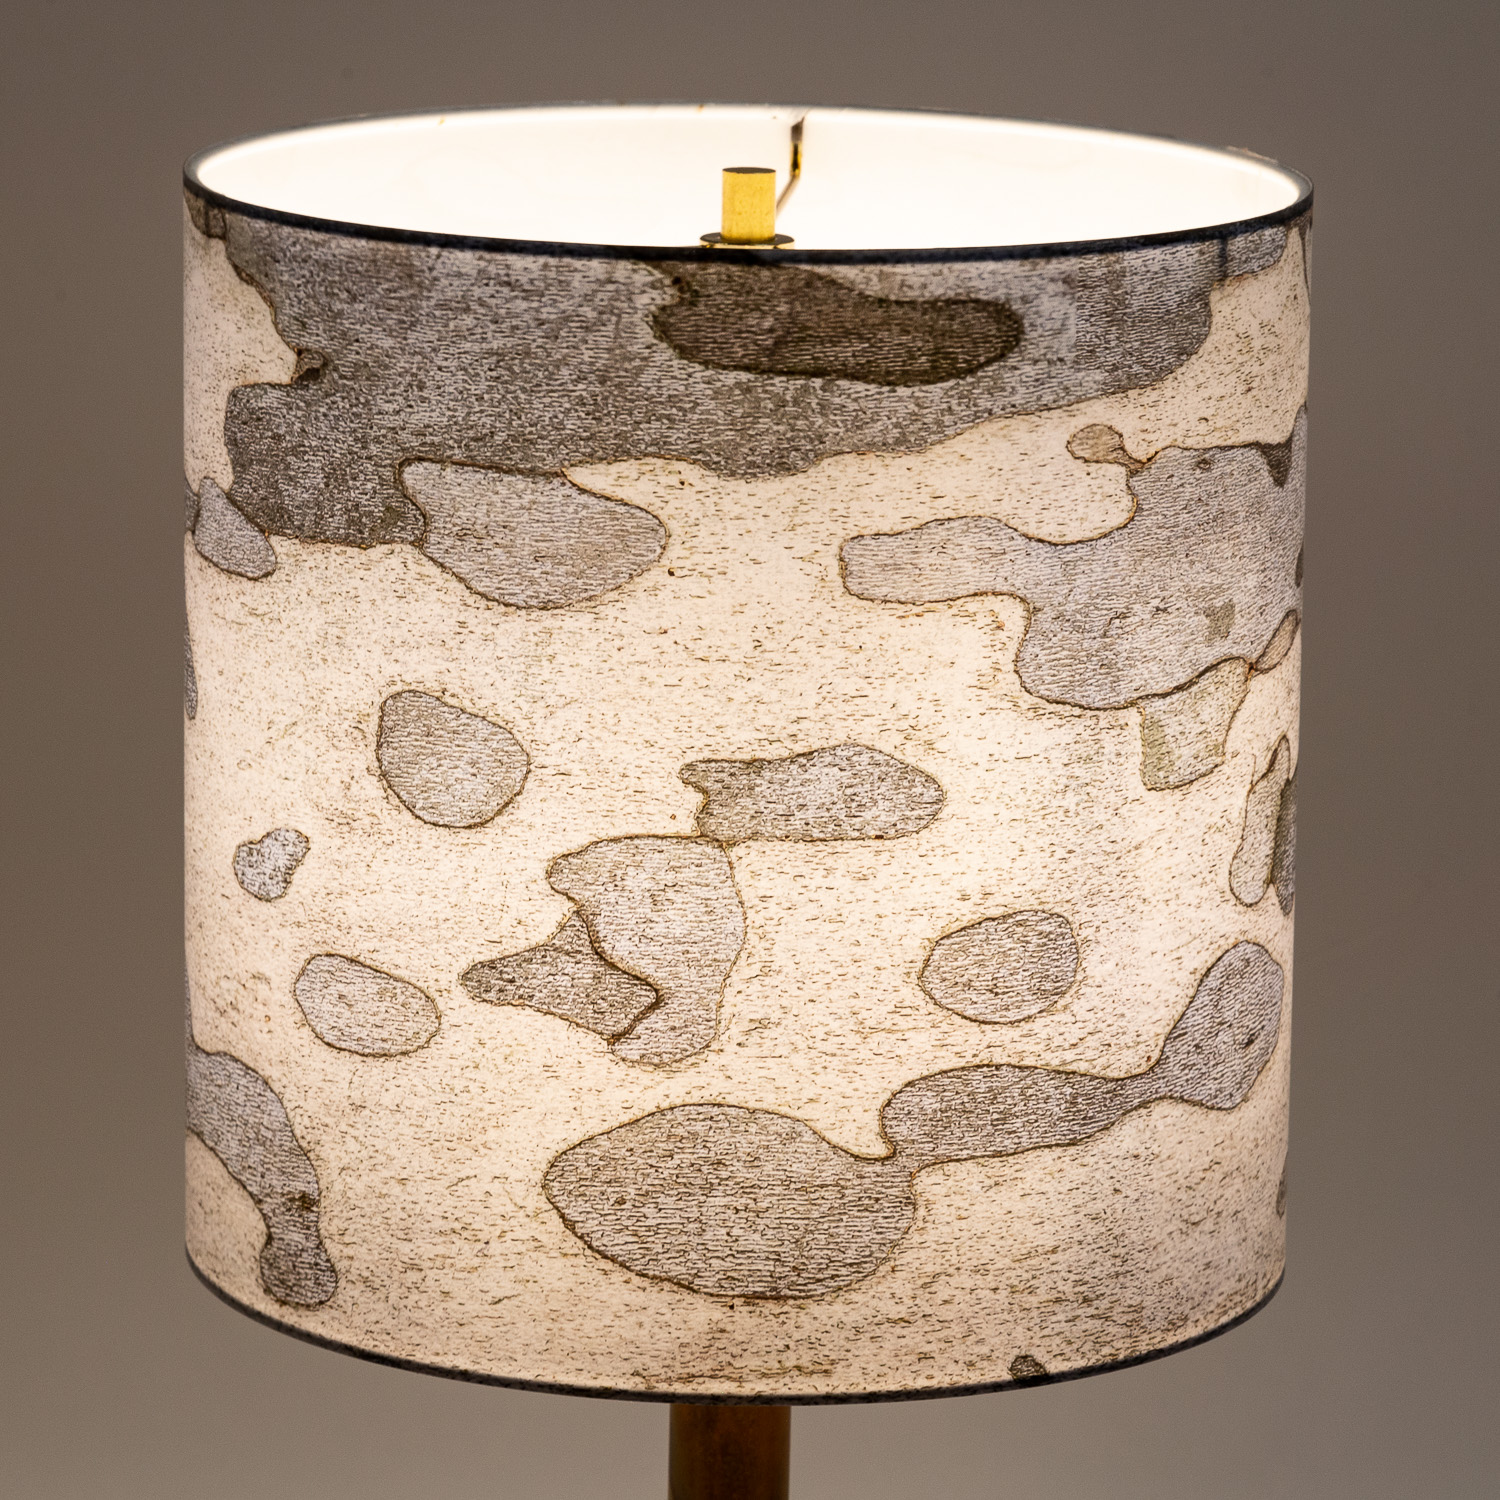 113: Patterns on the bark of a sycamore tree -- Photo on Lamp shade by David Elmore